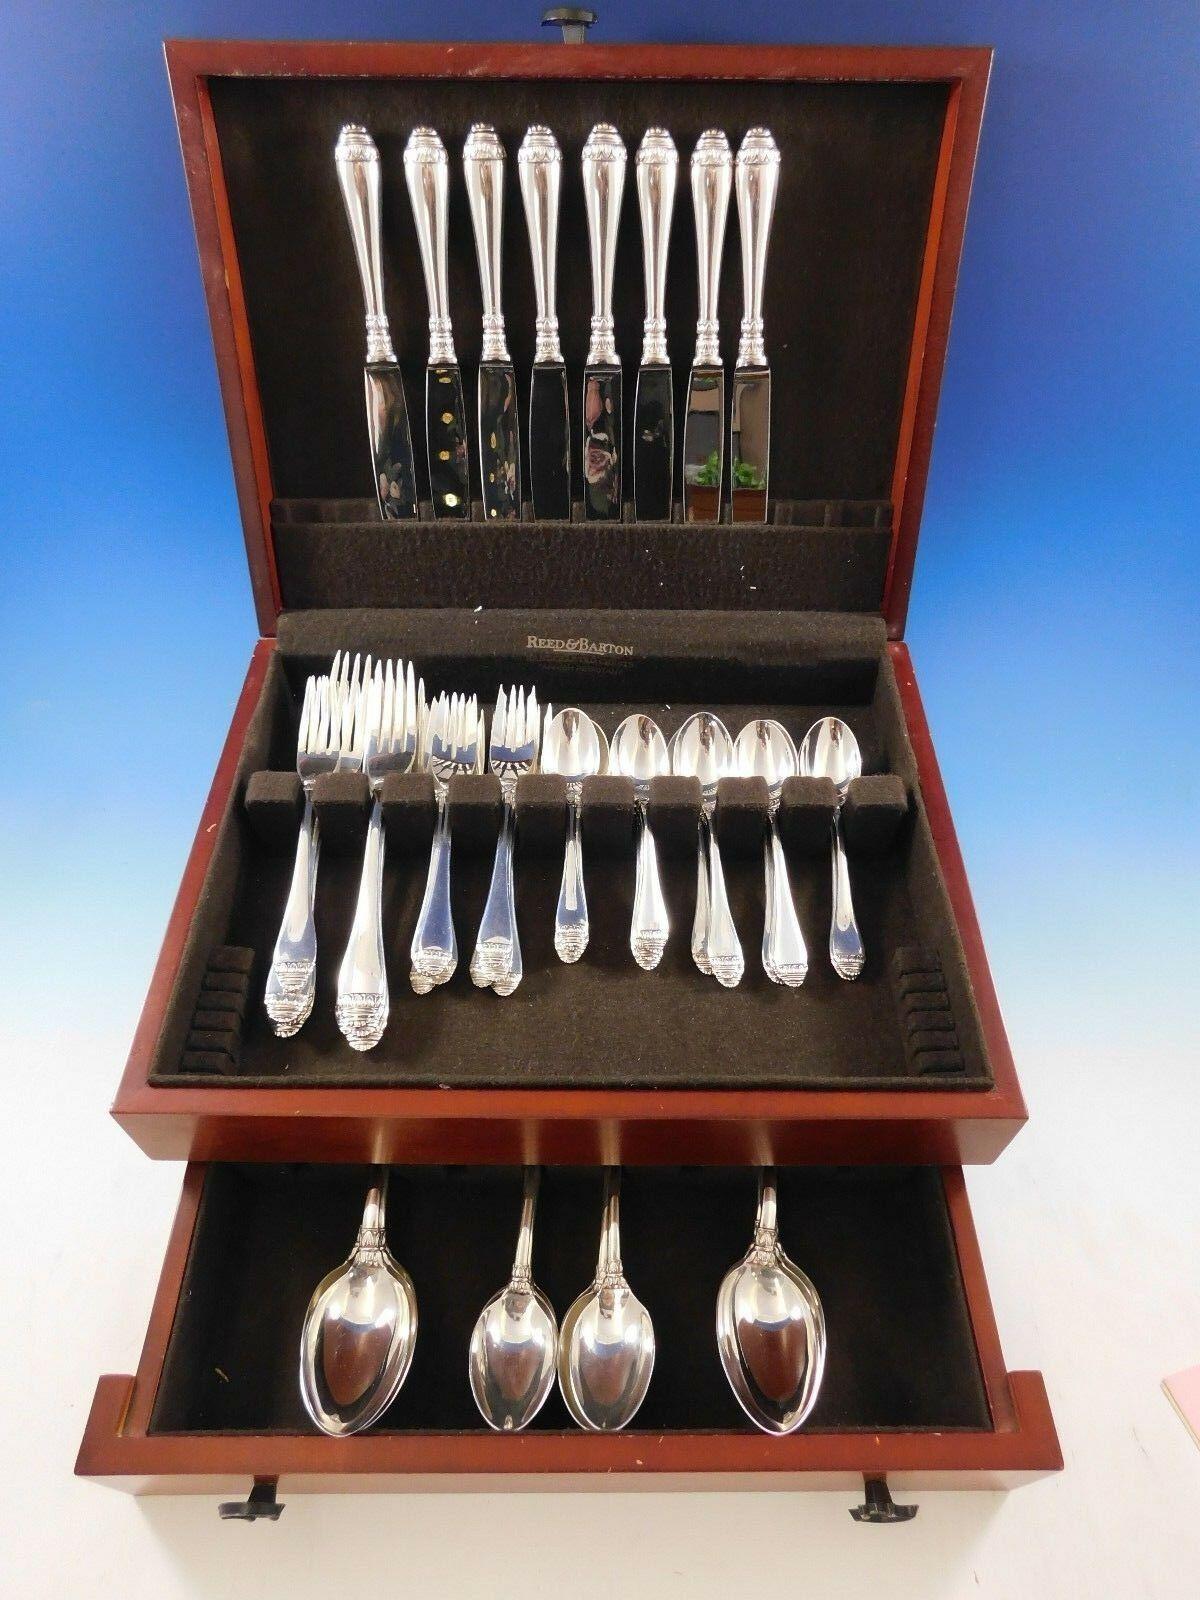 Stunning French Empire by Buccellati sterling silver flatware set, 56 pieces. This set includes:

8 dinner knives, 10